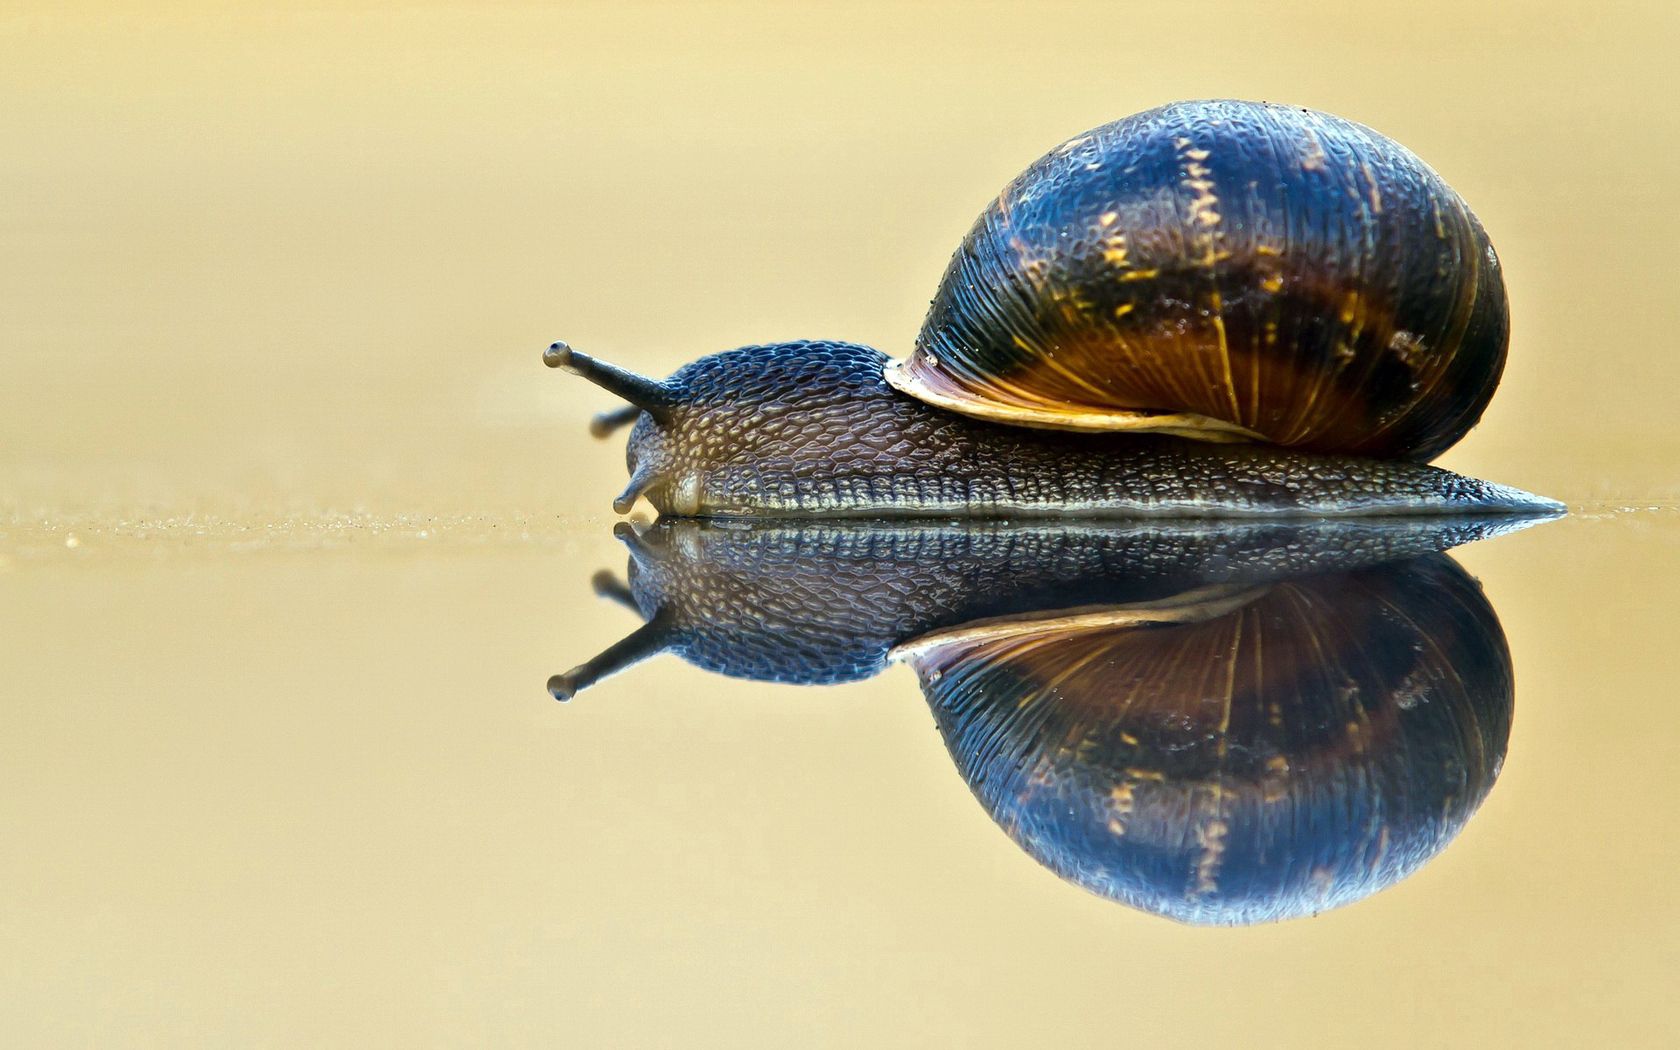 149706 download wallpaper reflection, macro, crawl, snail, carapace, shell, antennae, tendrils, sink screensavers and pictures for free